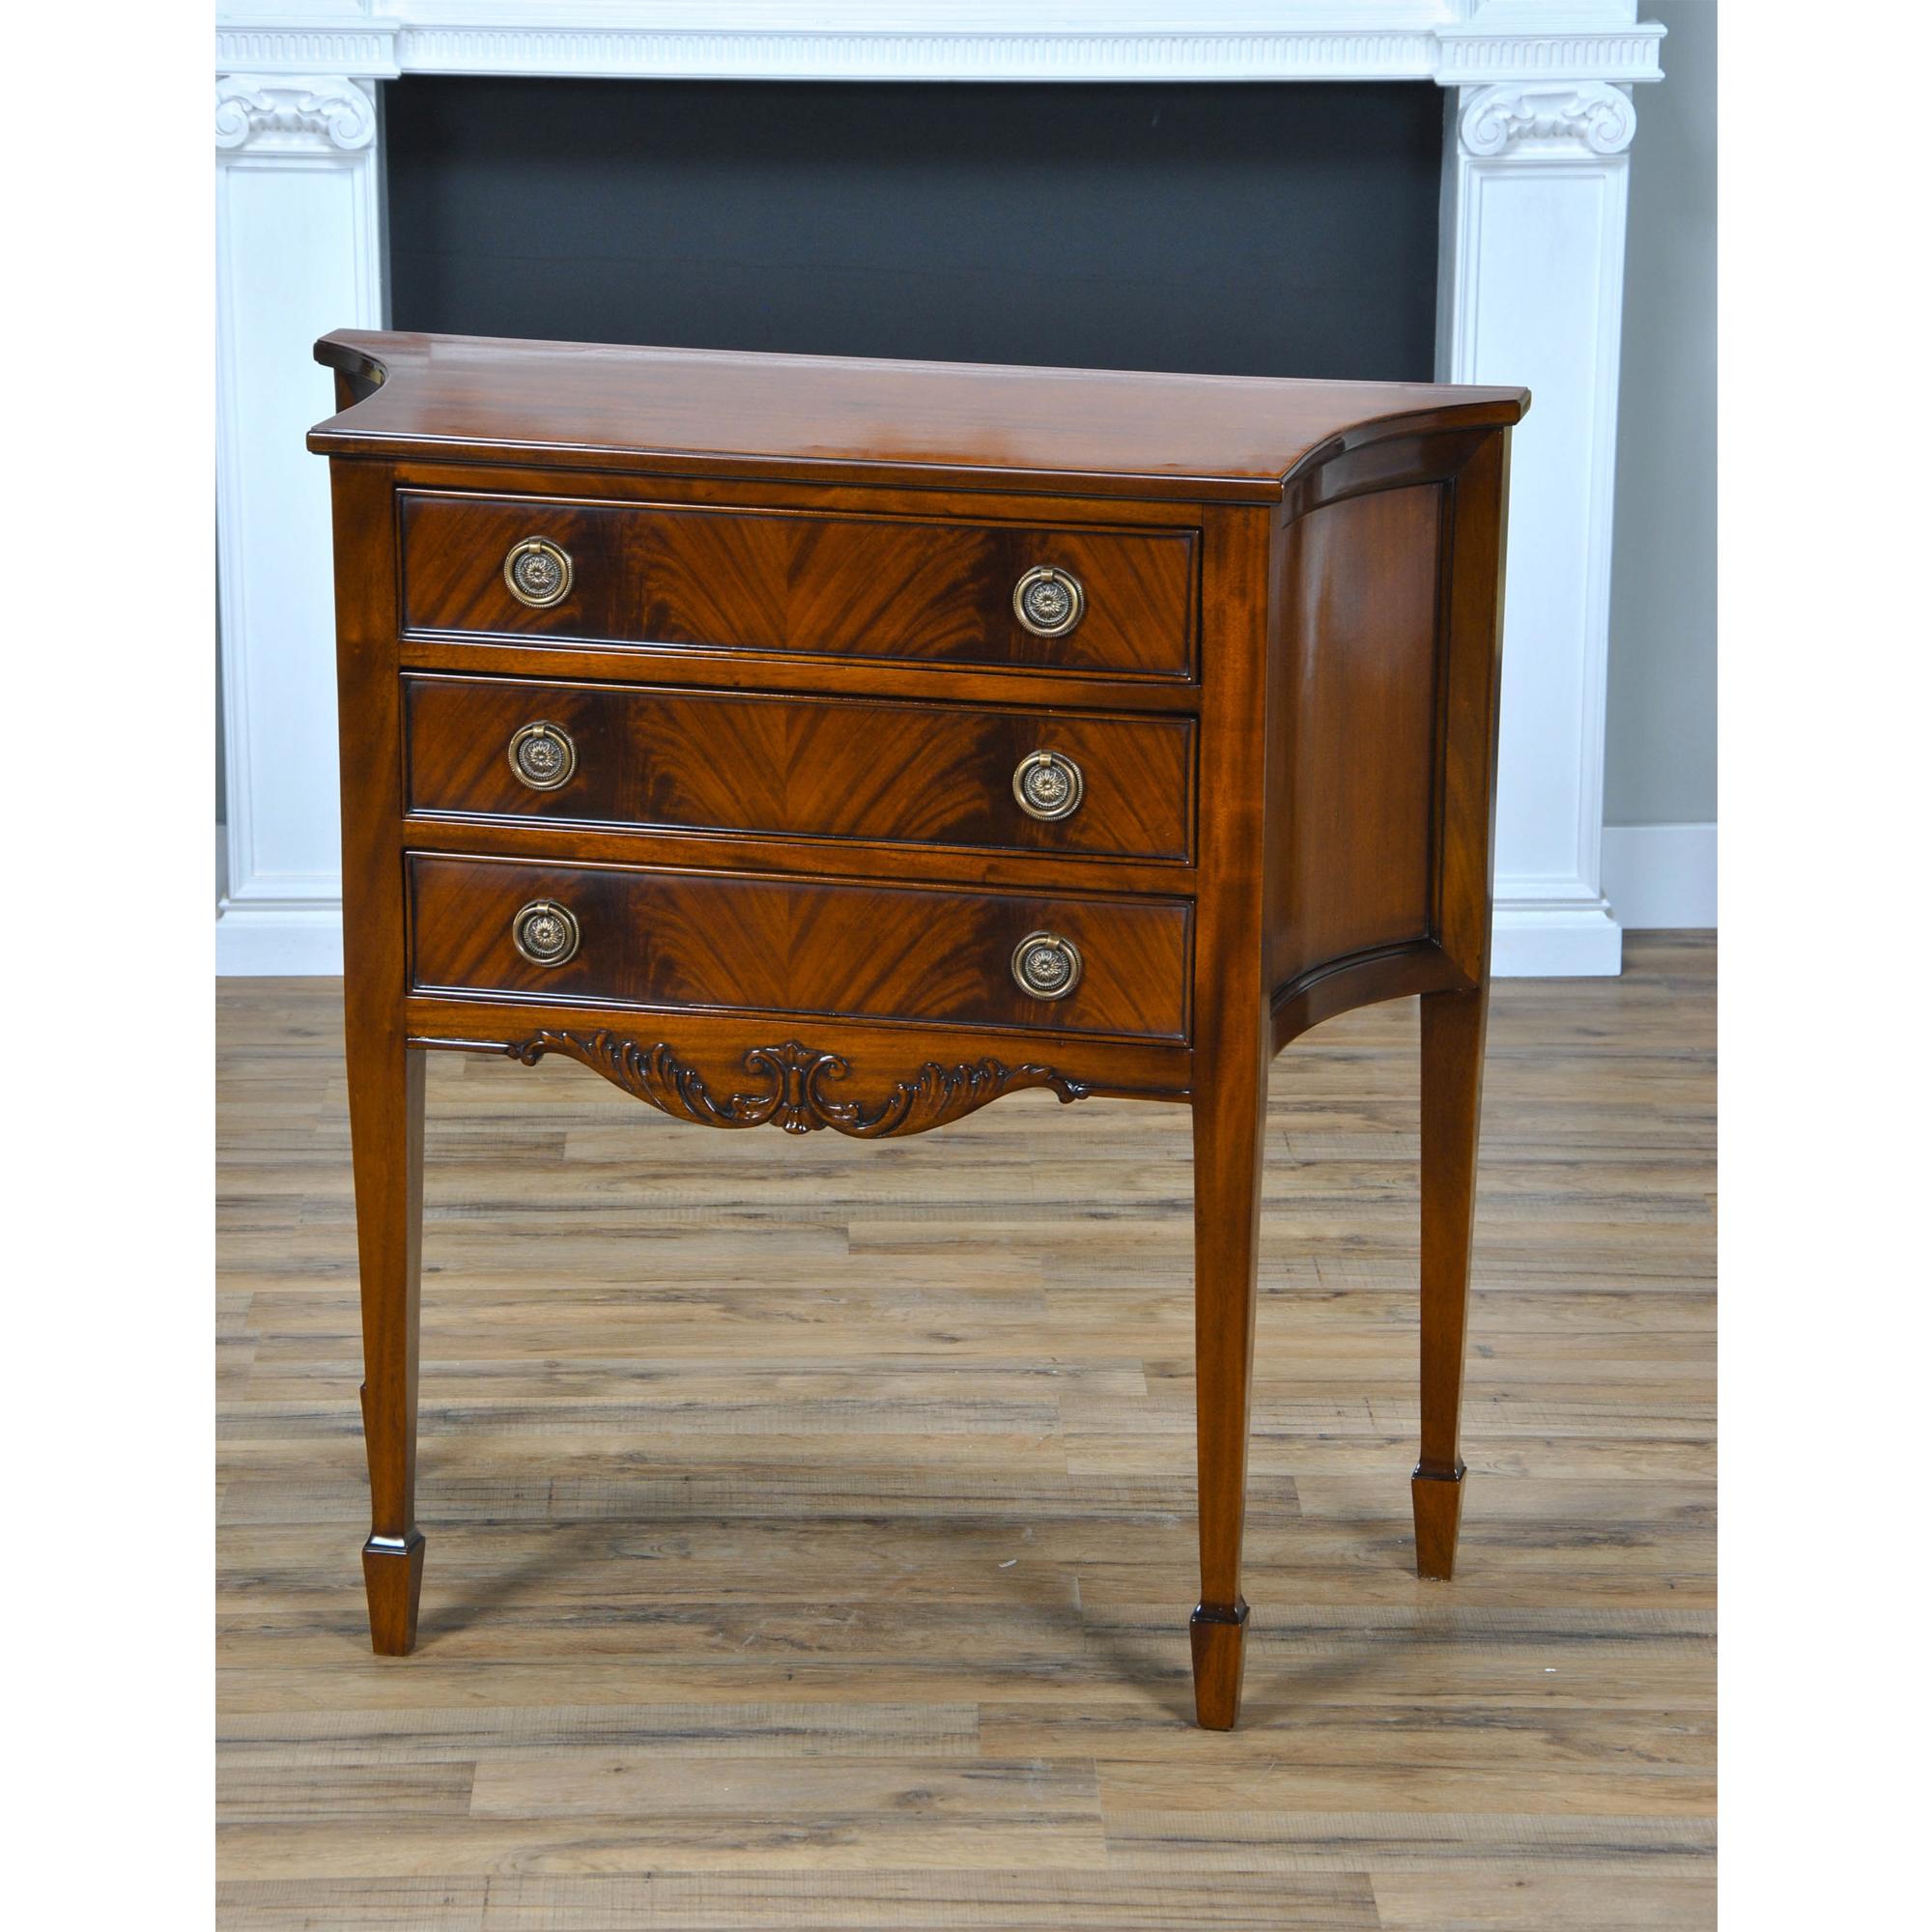 A small mahogany sideboard is perfect size Hepplewhite inspired sideboard is great for those hard to fill spaces in the dining room. The three drawers are dovetailed and feature designer quality, solid brass hardware. The shaped sides lend elegance